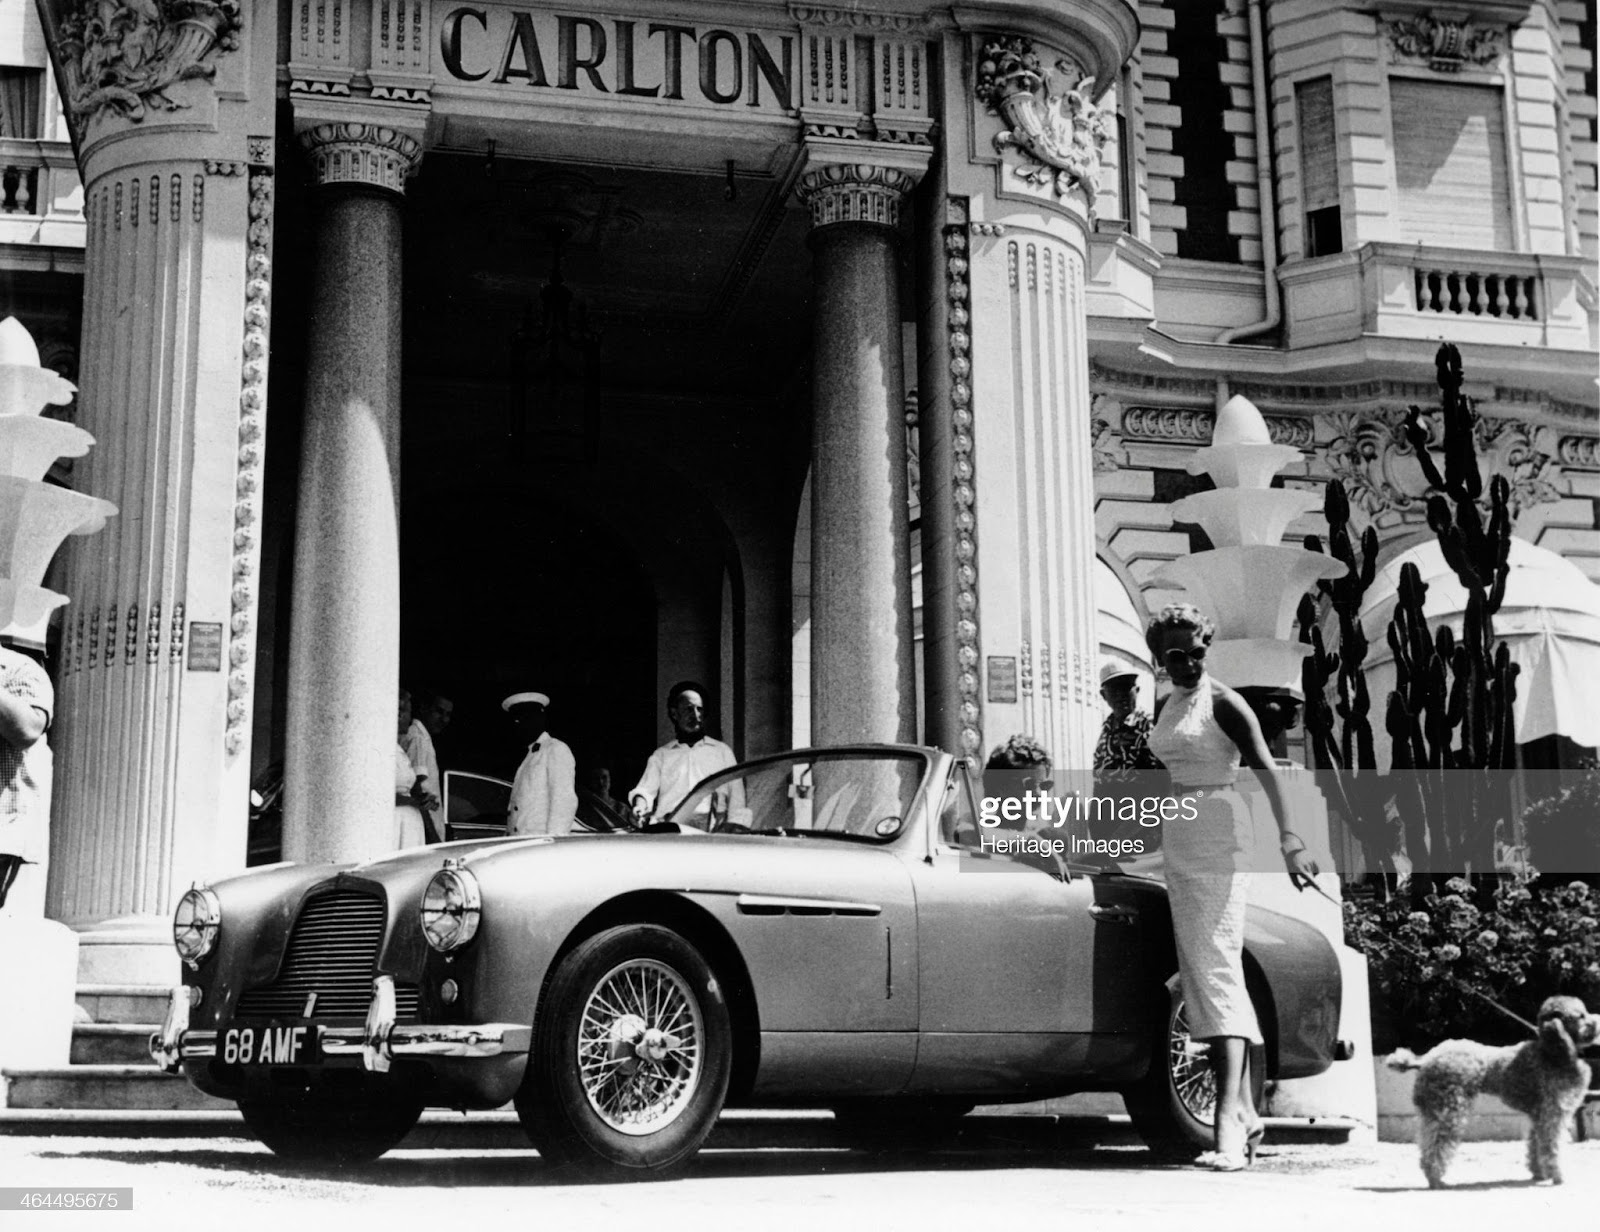 D:\Documenti\posts\posts\Women and motorsport\foto\1955\aston-martin-db24-outside-the-hotel-carlton-cannes-france-1955-a-picture-id464495675.jpg